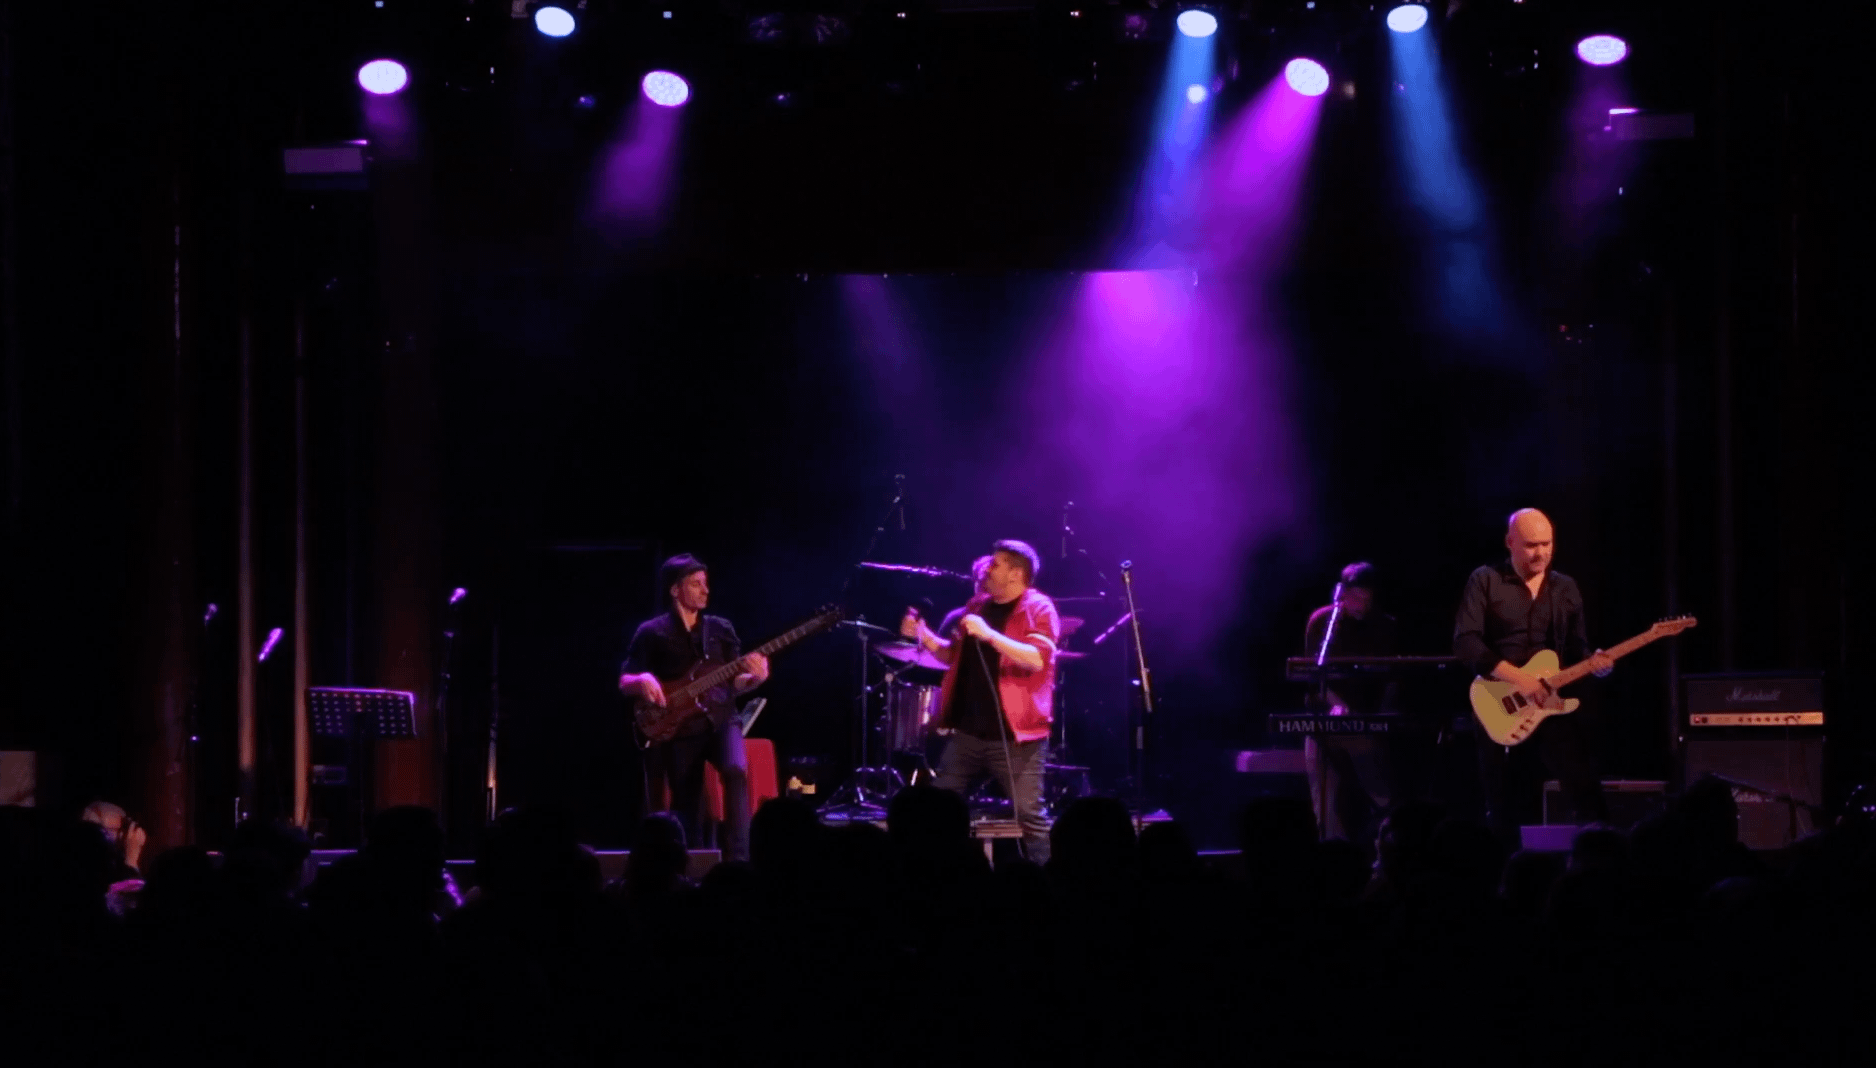 Musicians performing on stage